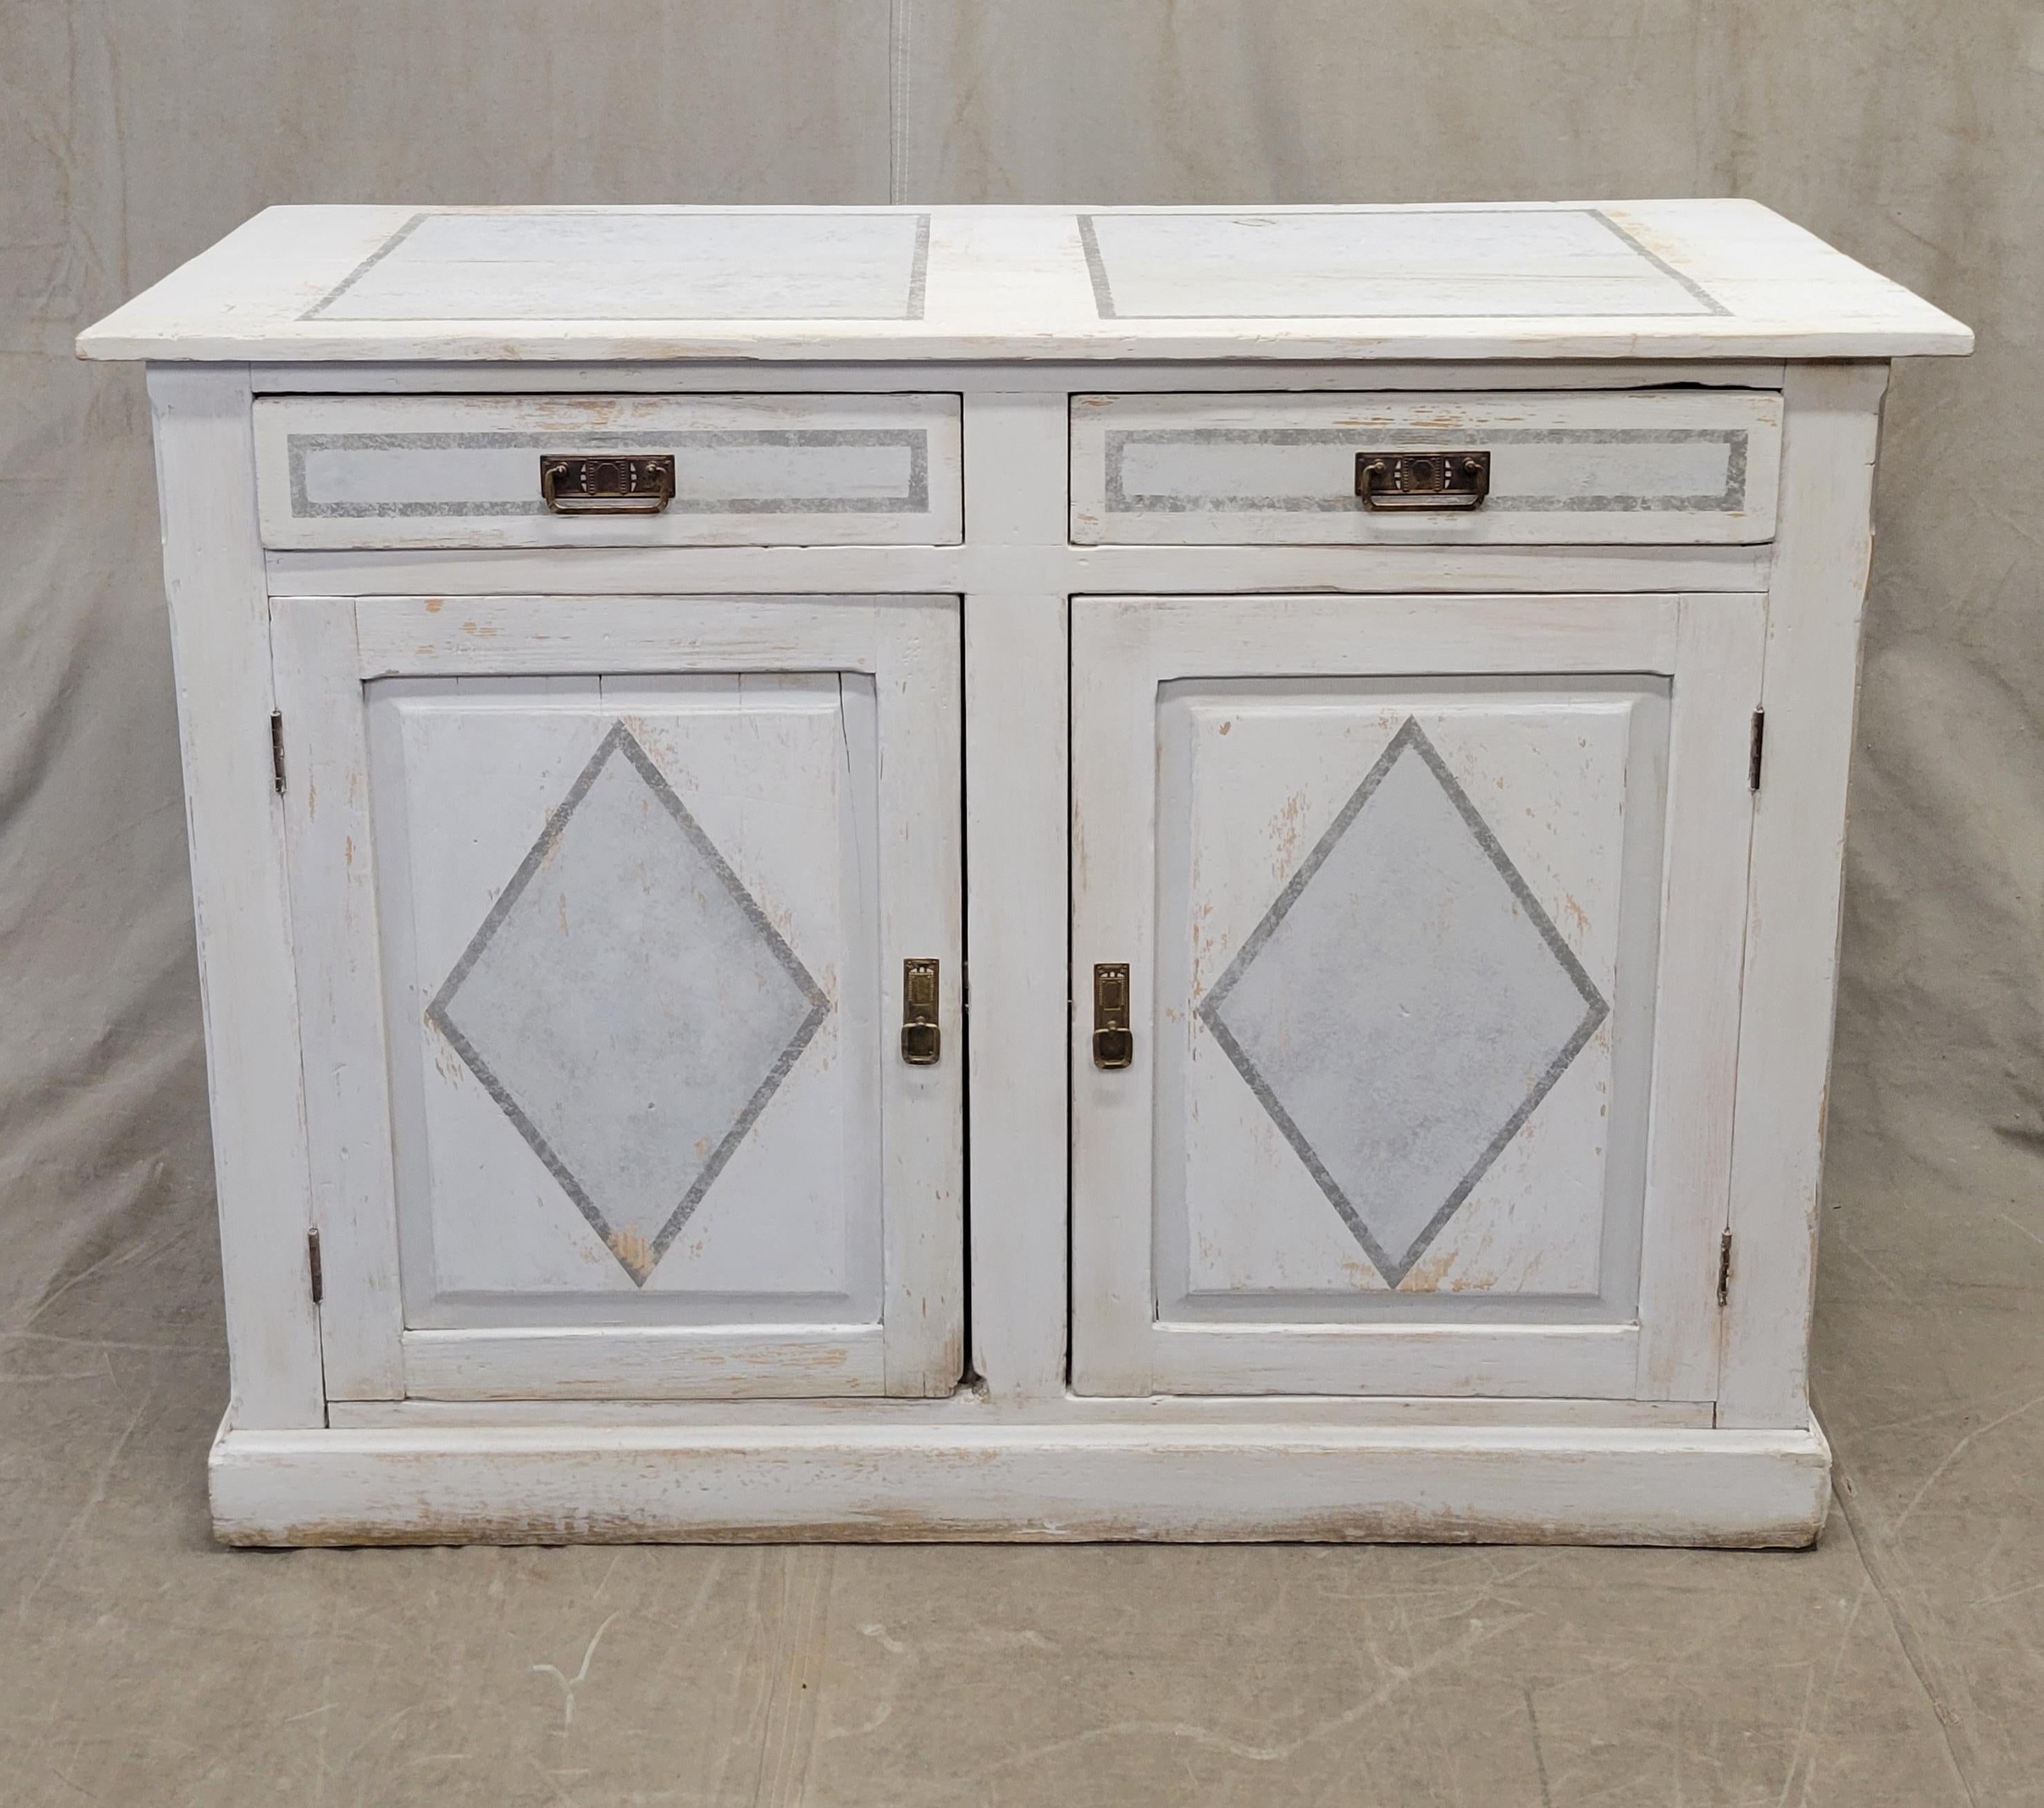 This charming antique pine farmhouse cabinet is white washed and accented with gray decorative paint and brass hardware. It is a rustic but strong and stable piece that offers a good amount of storage. Note the wood separation in the top from